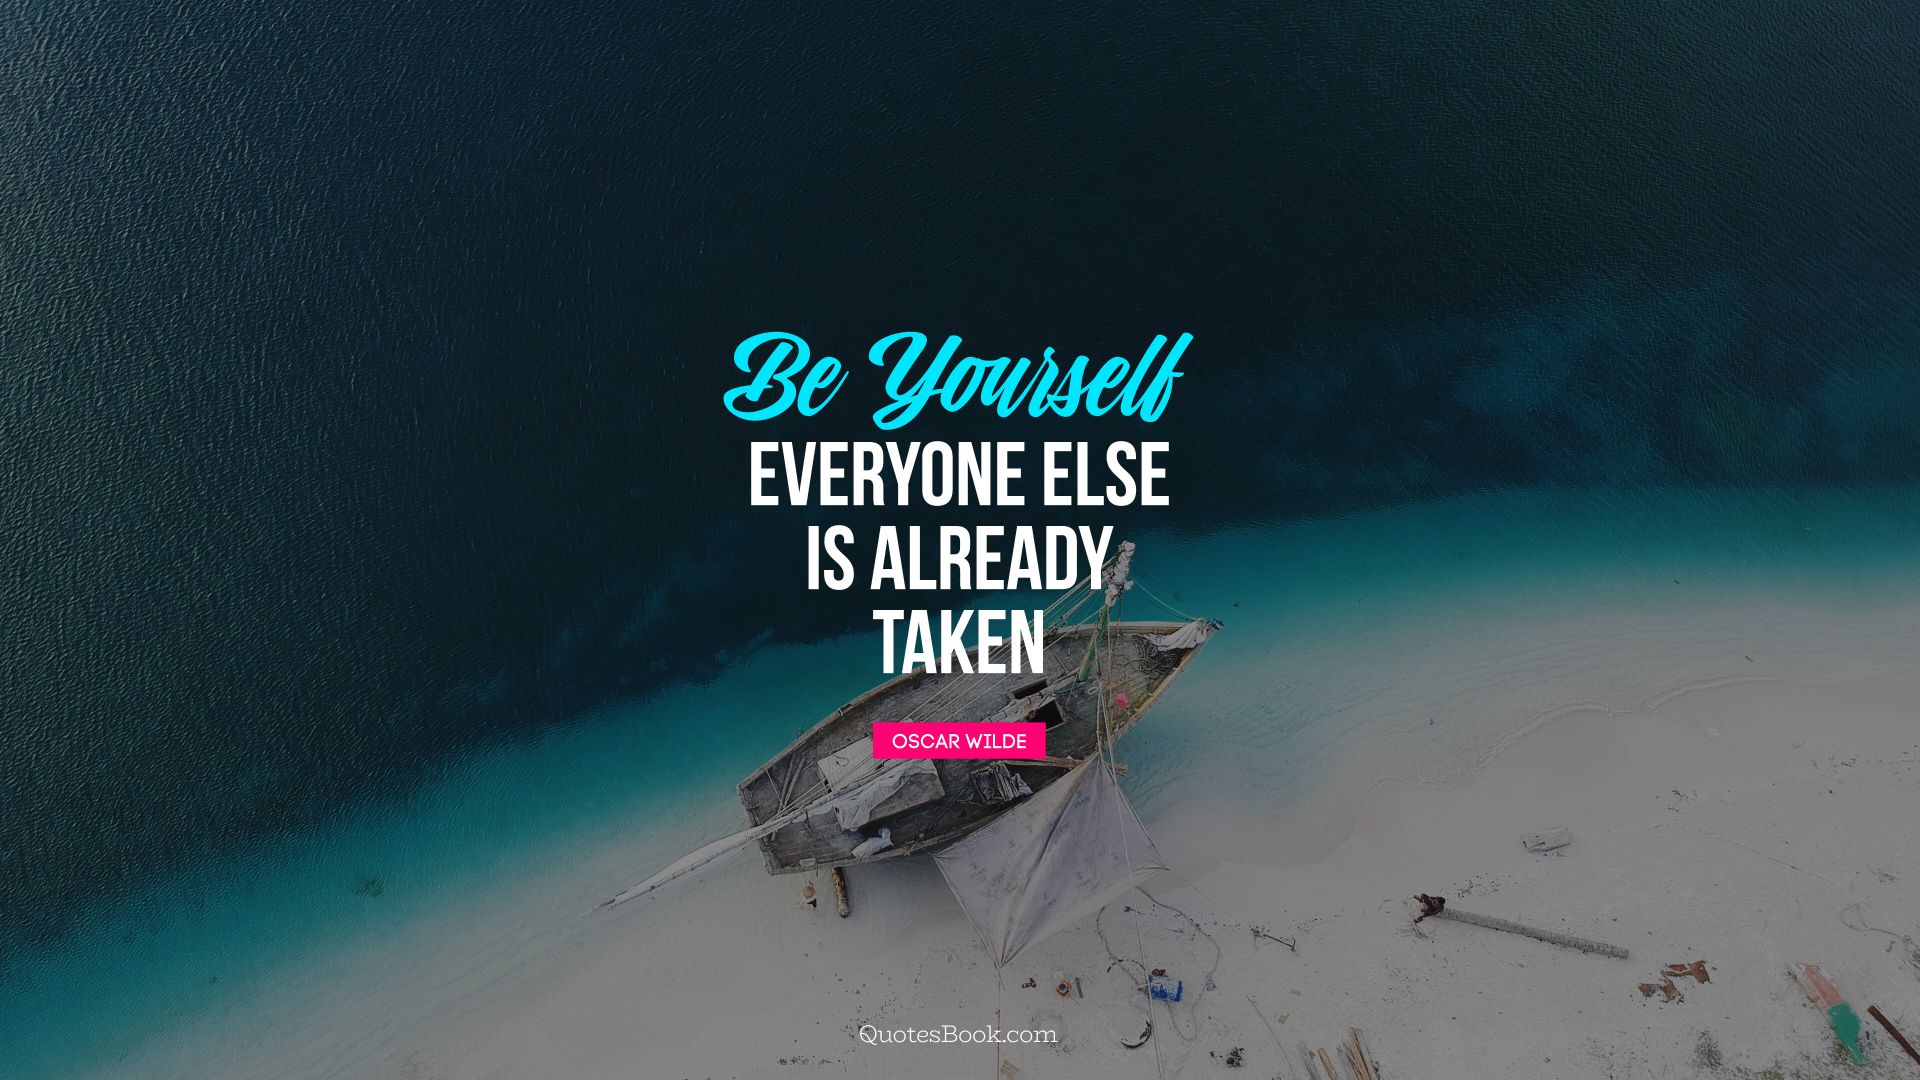 Be yourself; everyone else is already taken. - Quote by Oscar Wilde